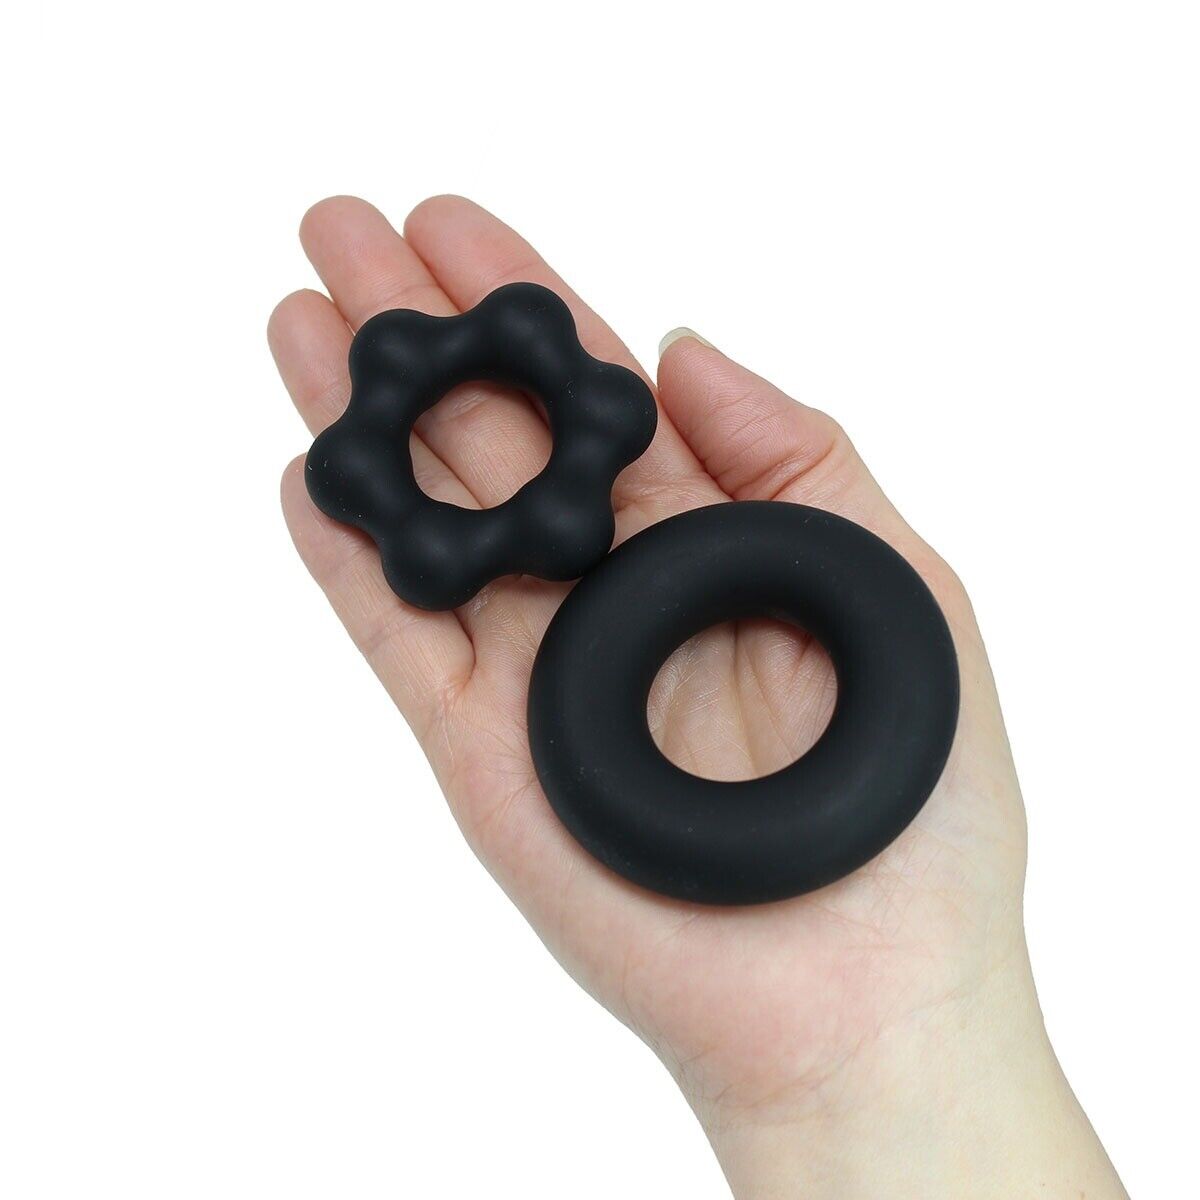 2 Stretchy Silicone Male Penis Enhancer Prolong Delay Sex Cock Ring Comb for Men